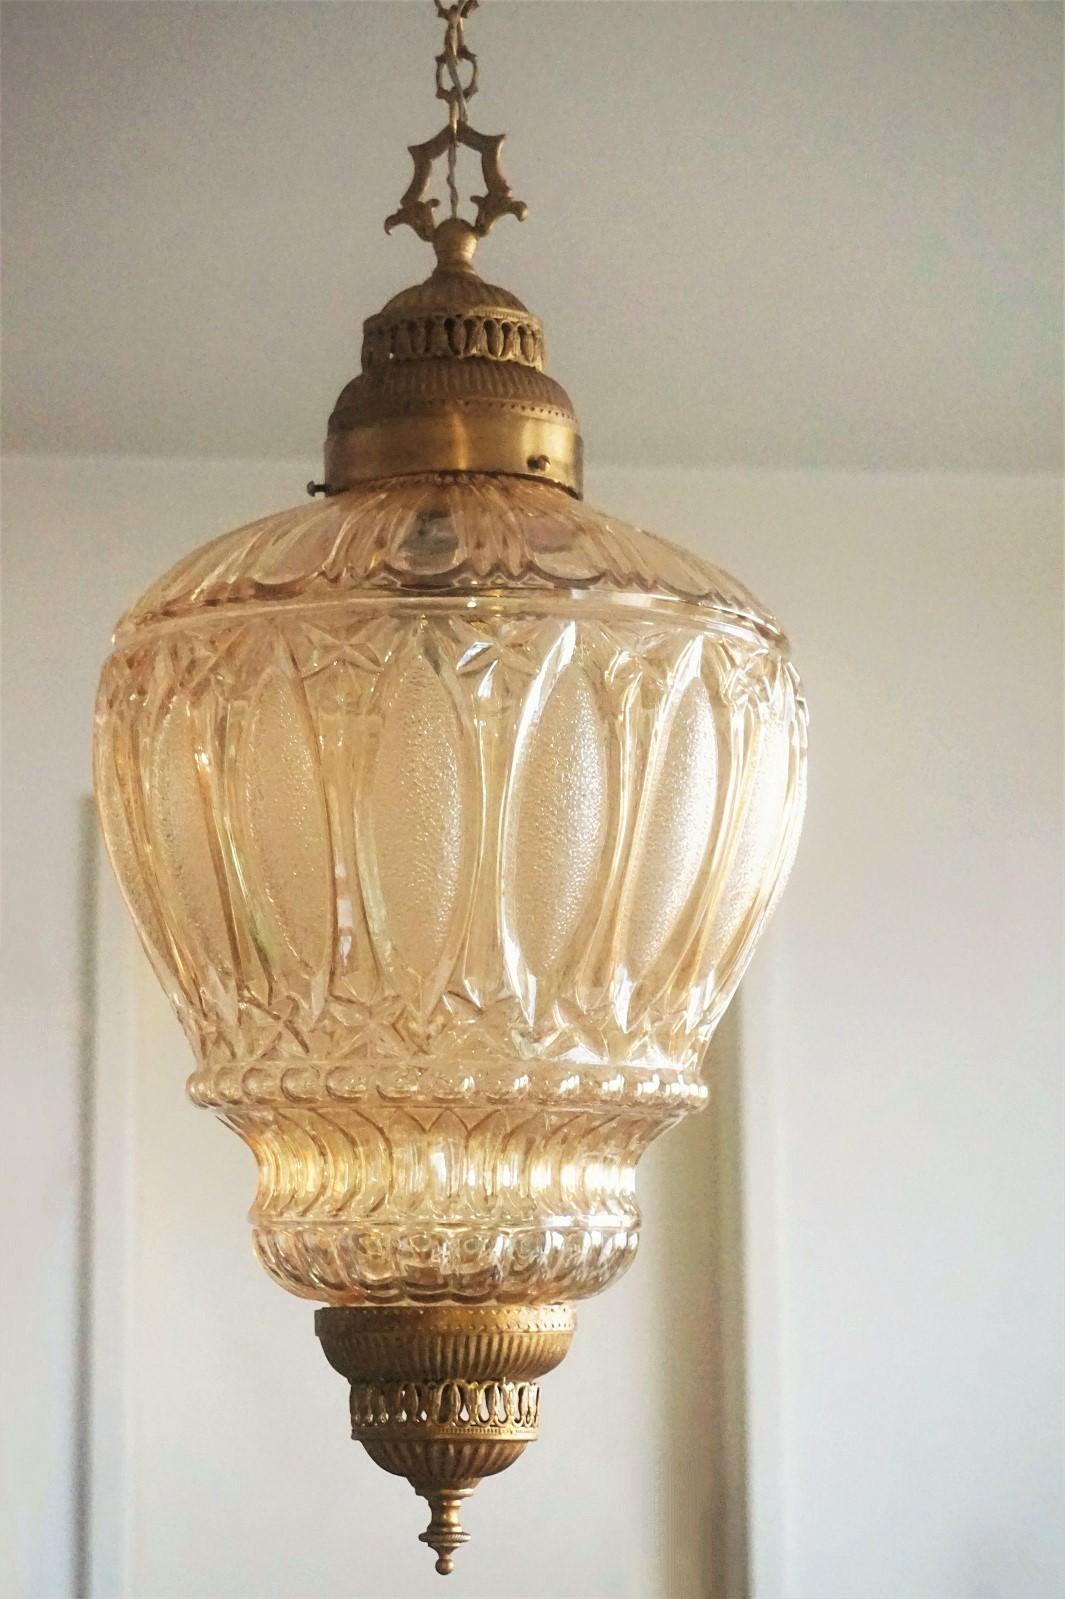 A beautiful Art Deco lantern or pendant with large high relief amber glass shade and brass mounts, France, circa 1930. 
One large light socket for 60w-100w bulb.
Measures:
Total height 44 inch (113 cm), variable height 
Height without chain and